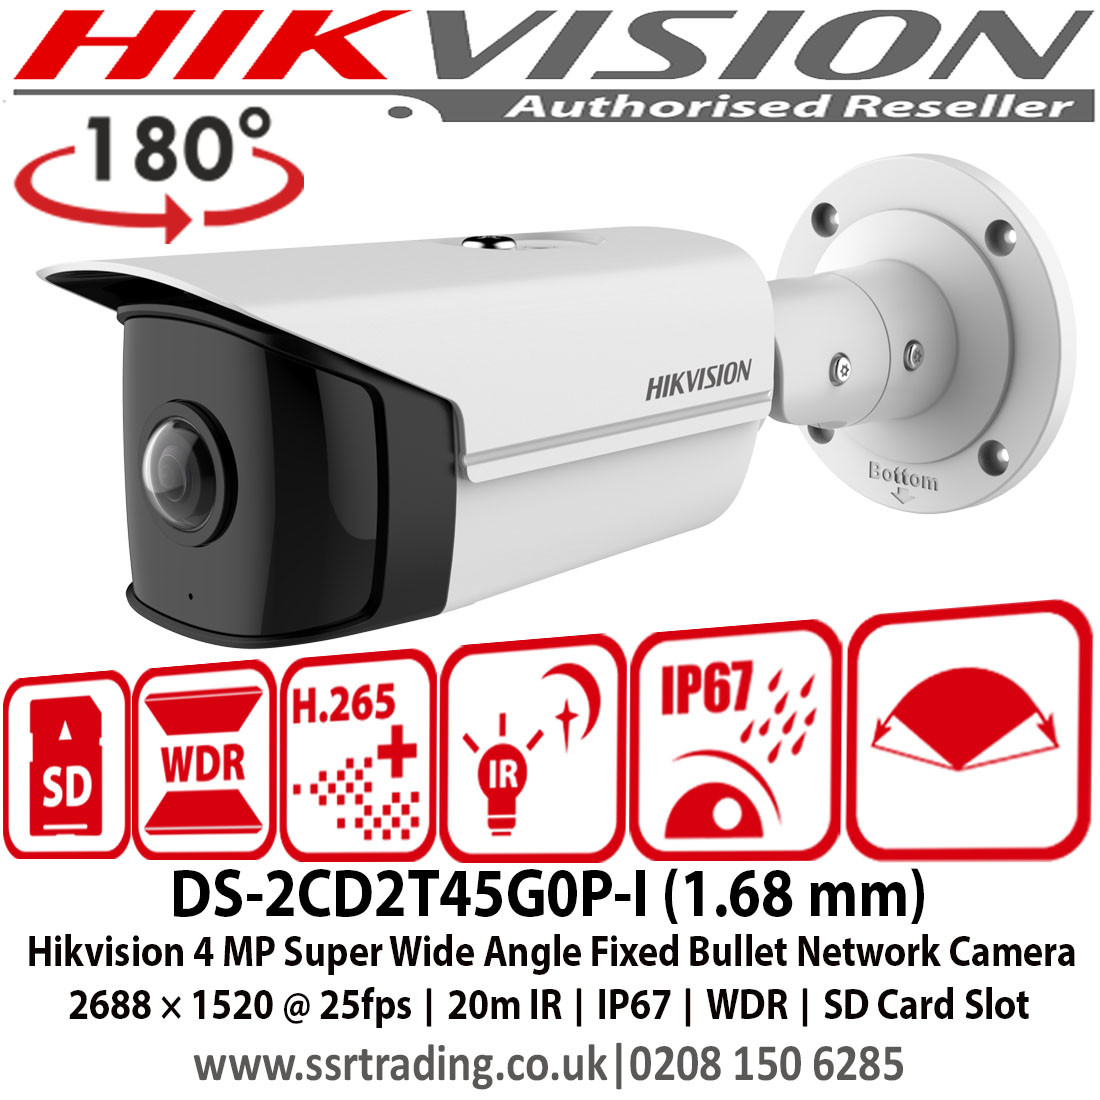 Hikvision 4MP Super Wide Angle Fixed Lens Bullet Network Camera, 2688 ×  1520 @ 25fps, 20m IR, IP67, WDR, SD Card Slot - DS-2CD2T45G0P-I (1.68 mm)